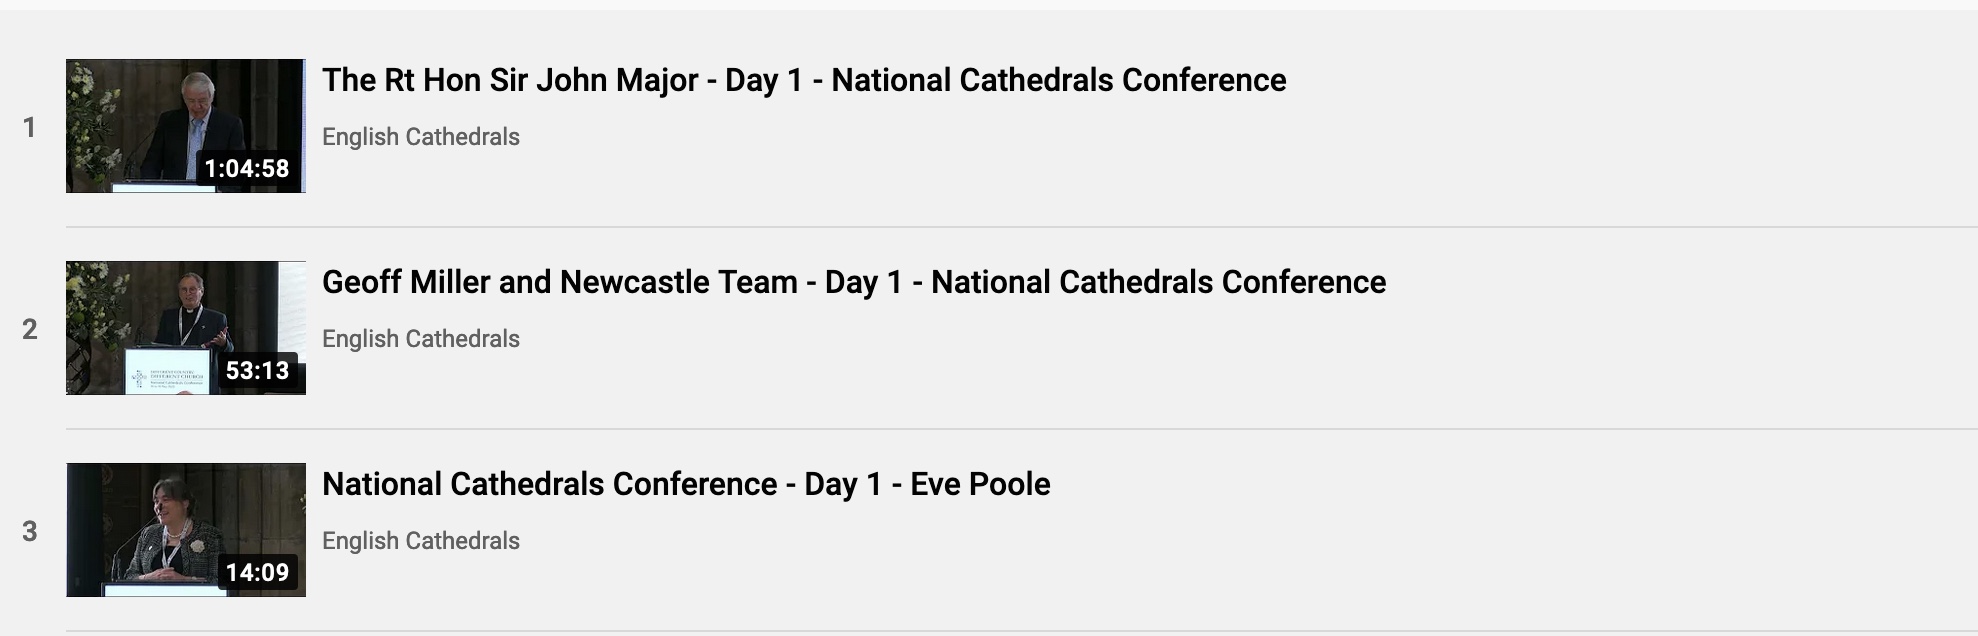 National Cathedrals Conference - News